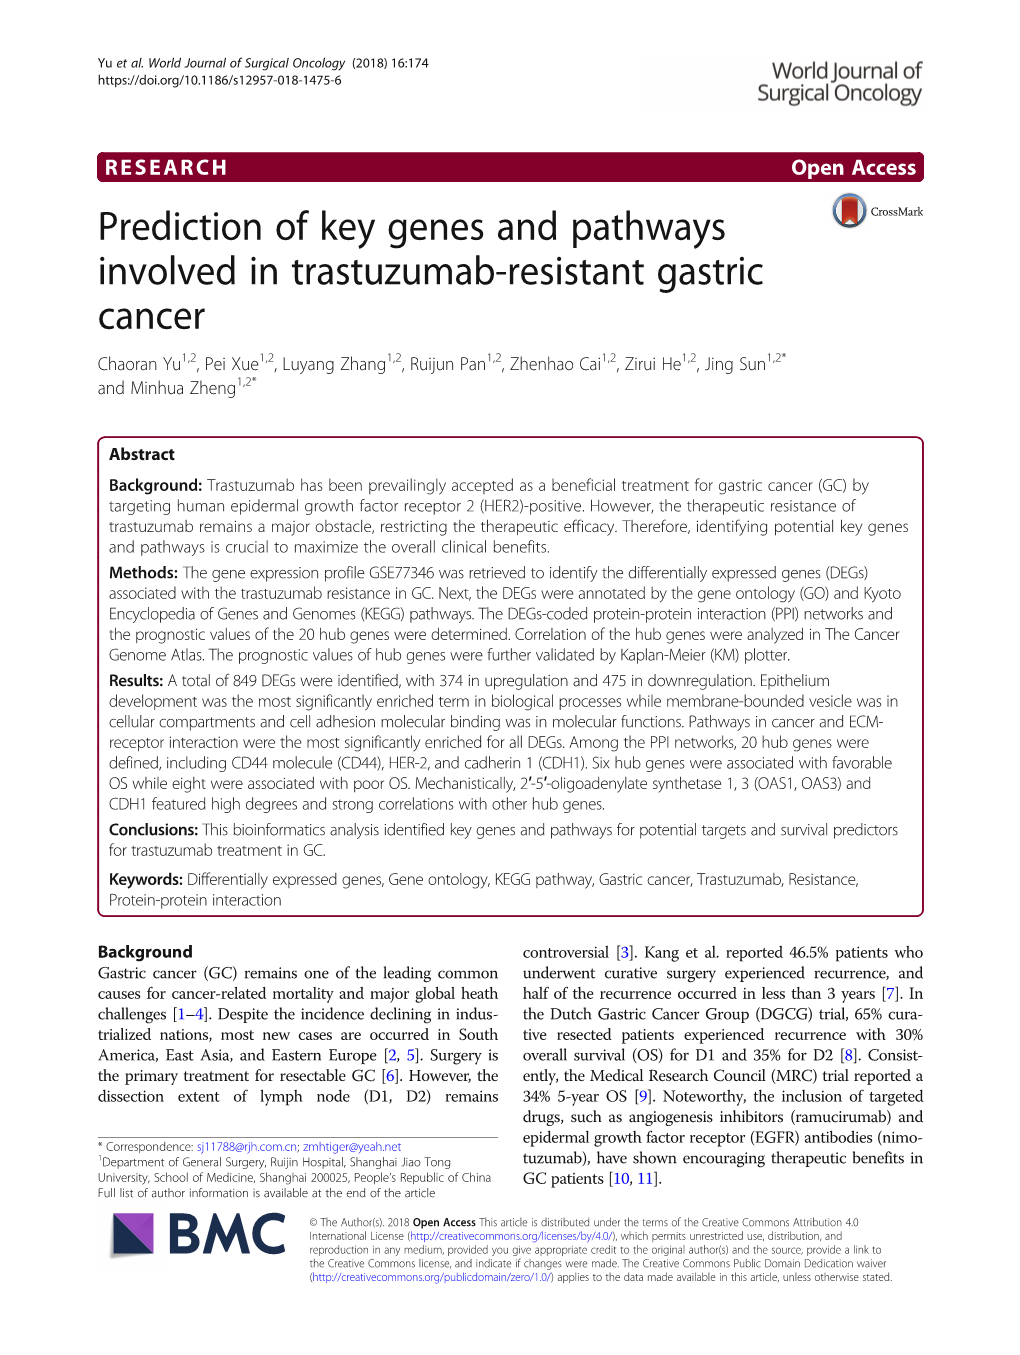 Prediction of Key Genes and Pathways Involved in Trastuzumab-Resistant